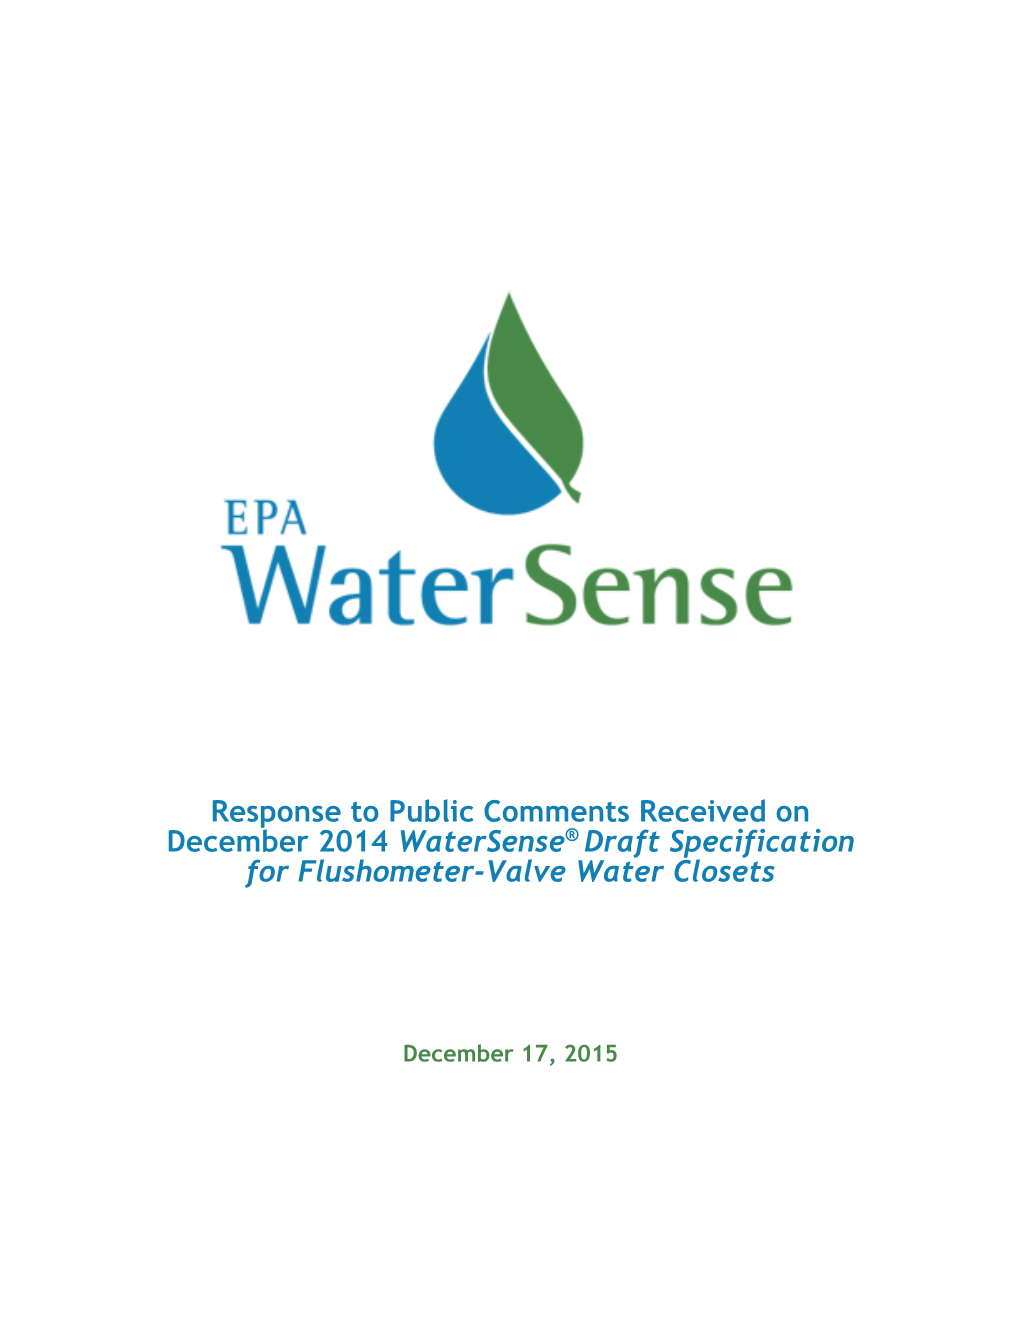 Response to Public Comments Received on December 2014 Watersense® Draft Specification for Flushometer-Valve Water Closets